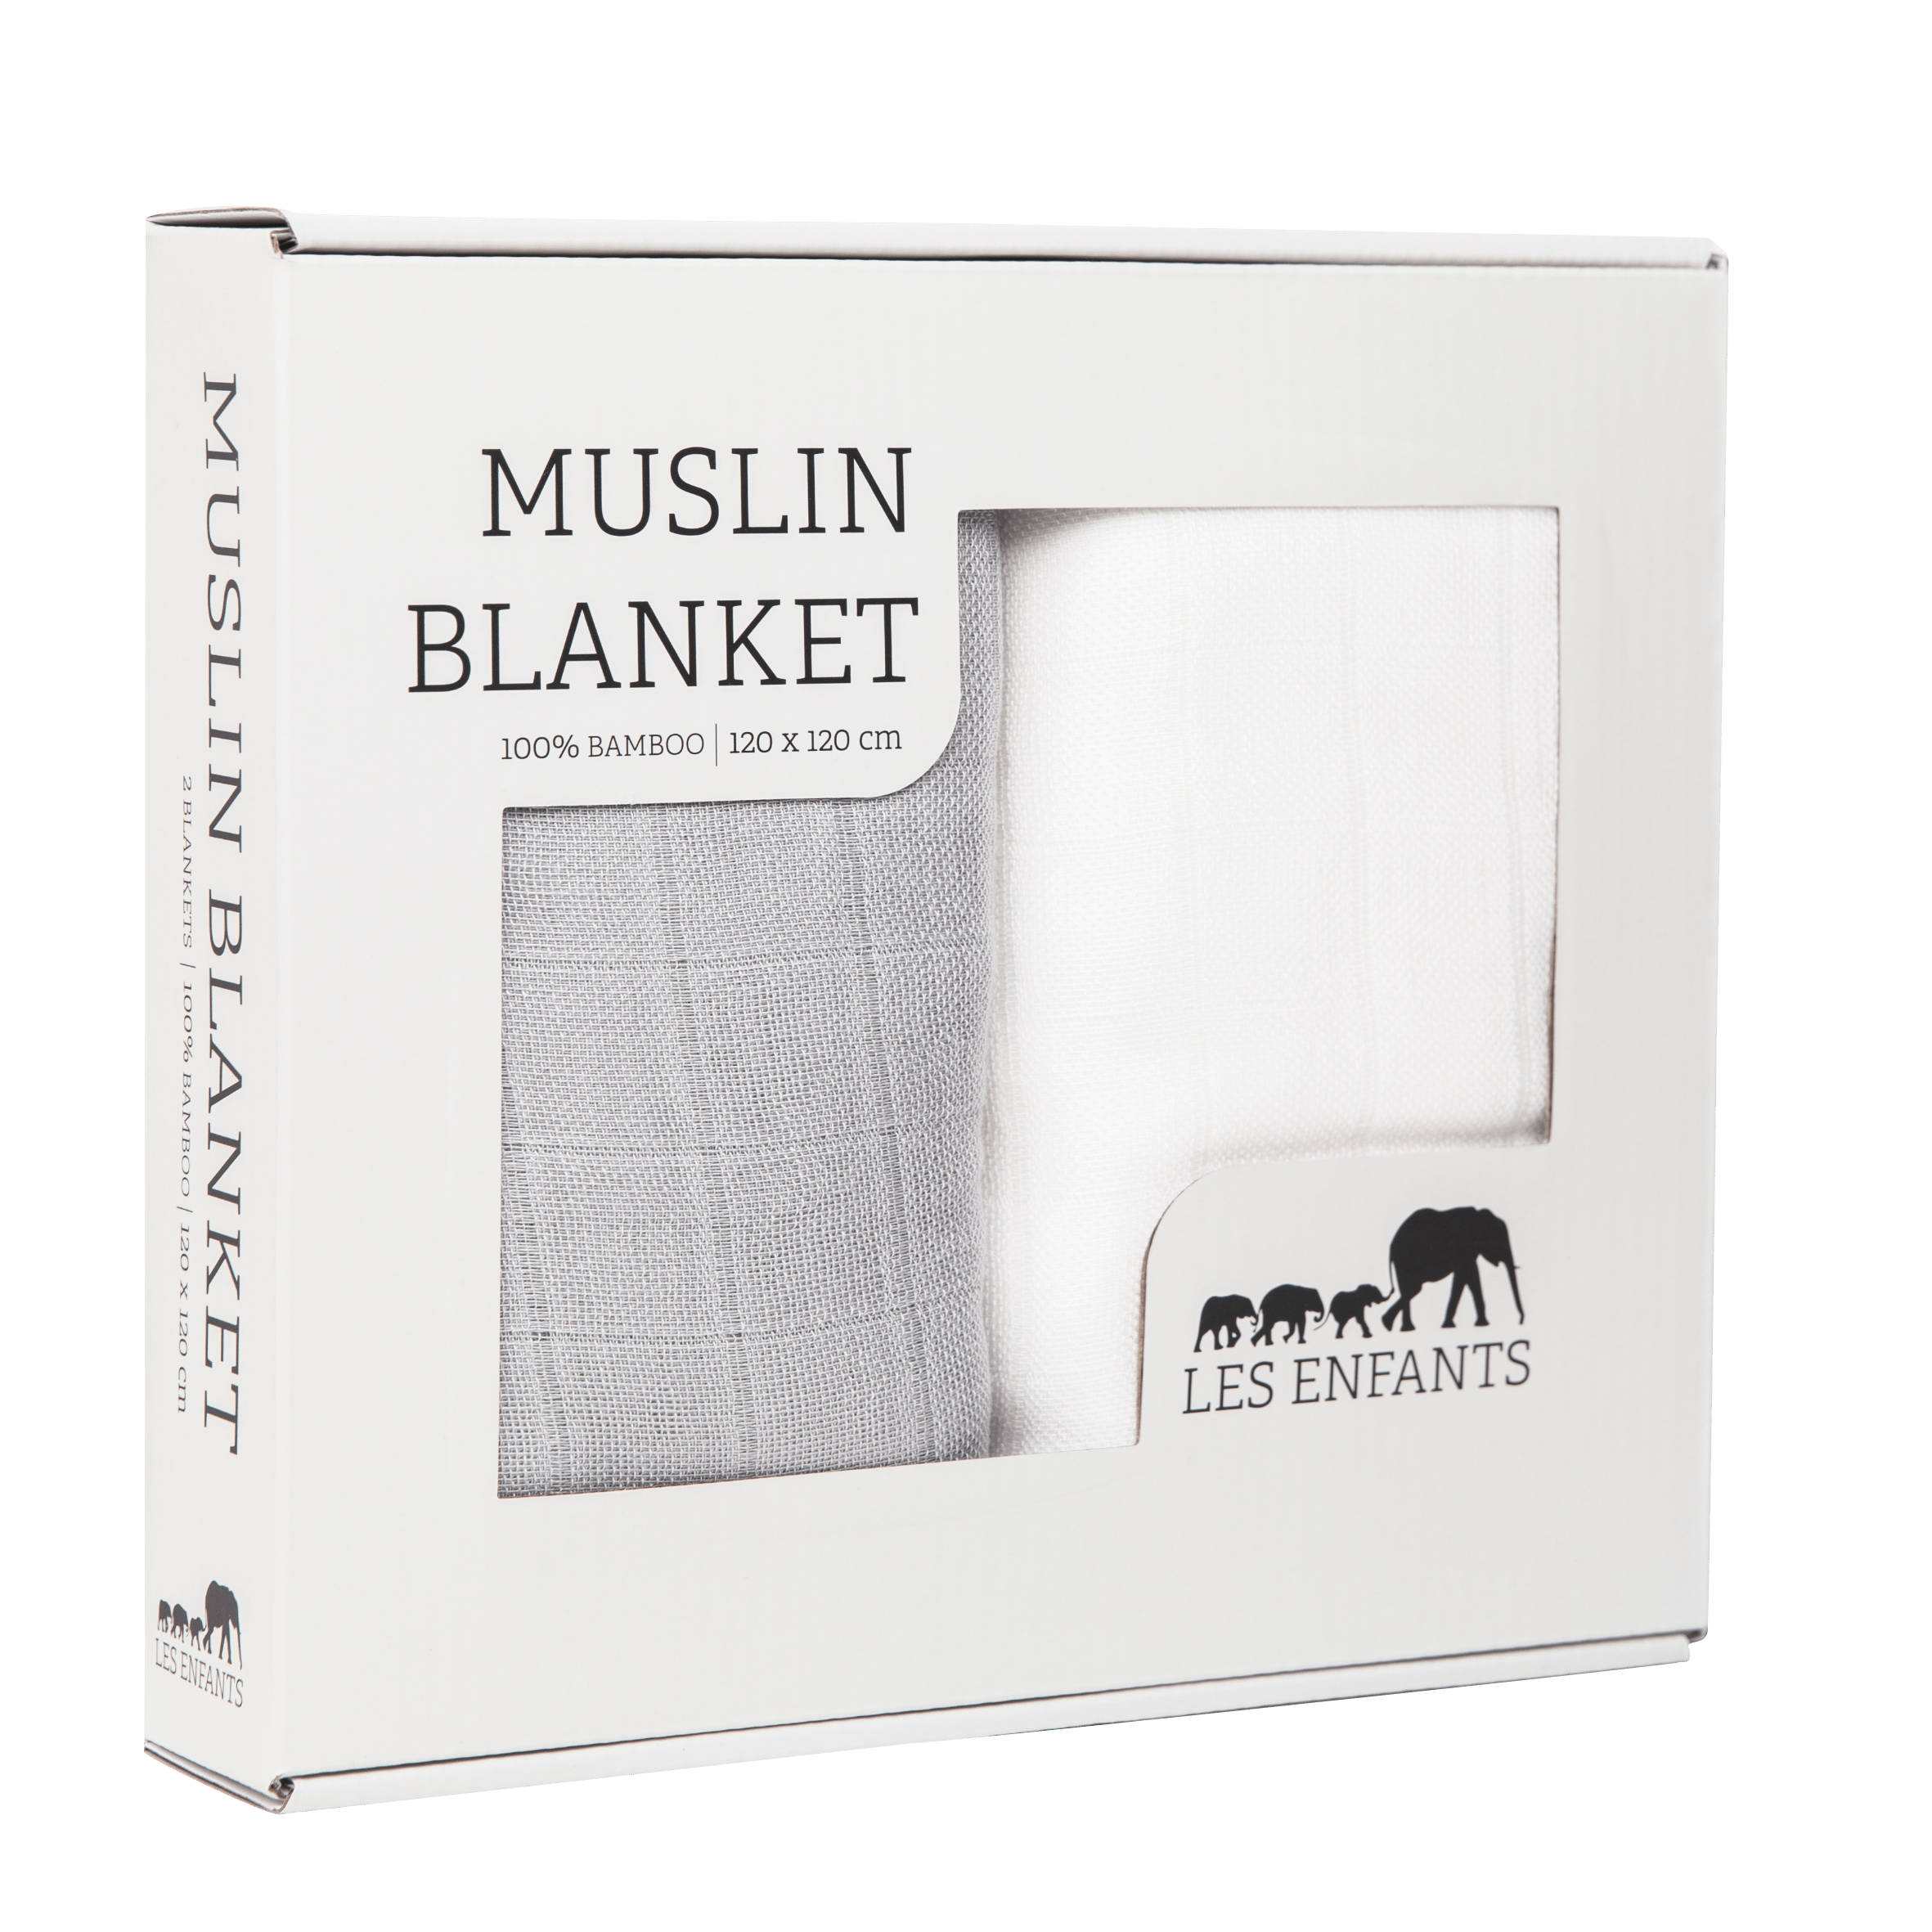 Les enfants 100% bamboo muslin blanket grey and white set in a present box